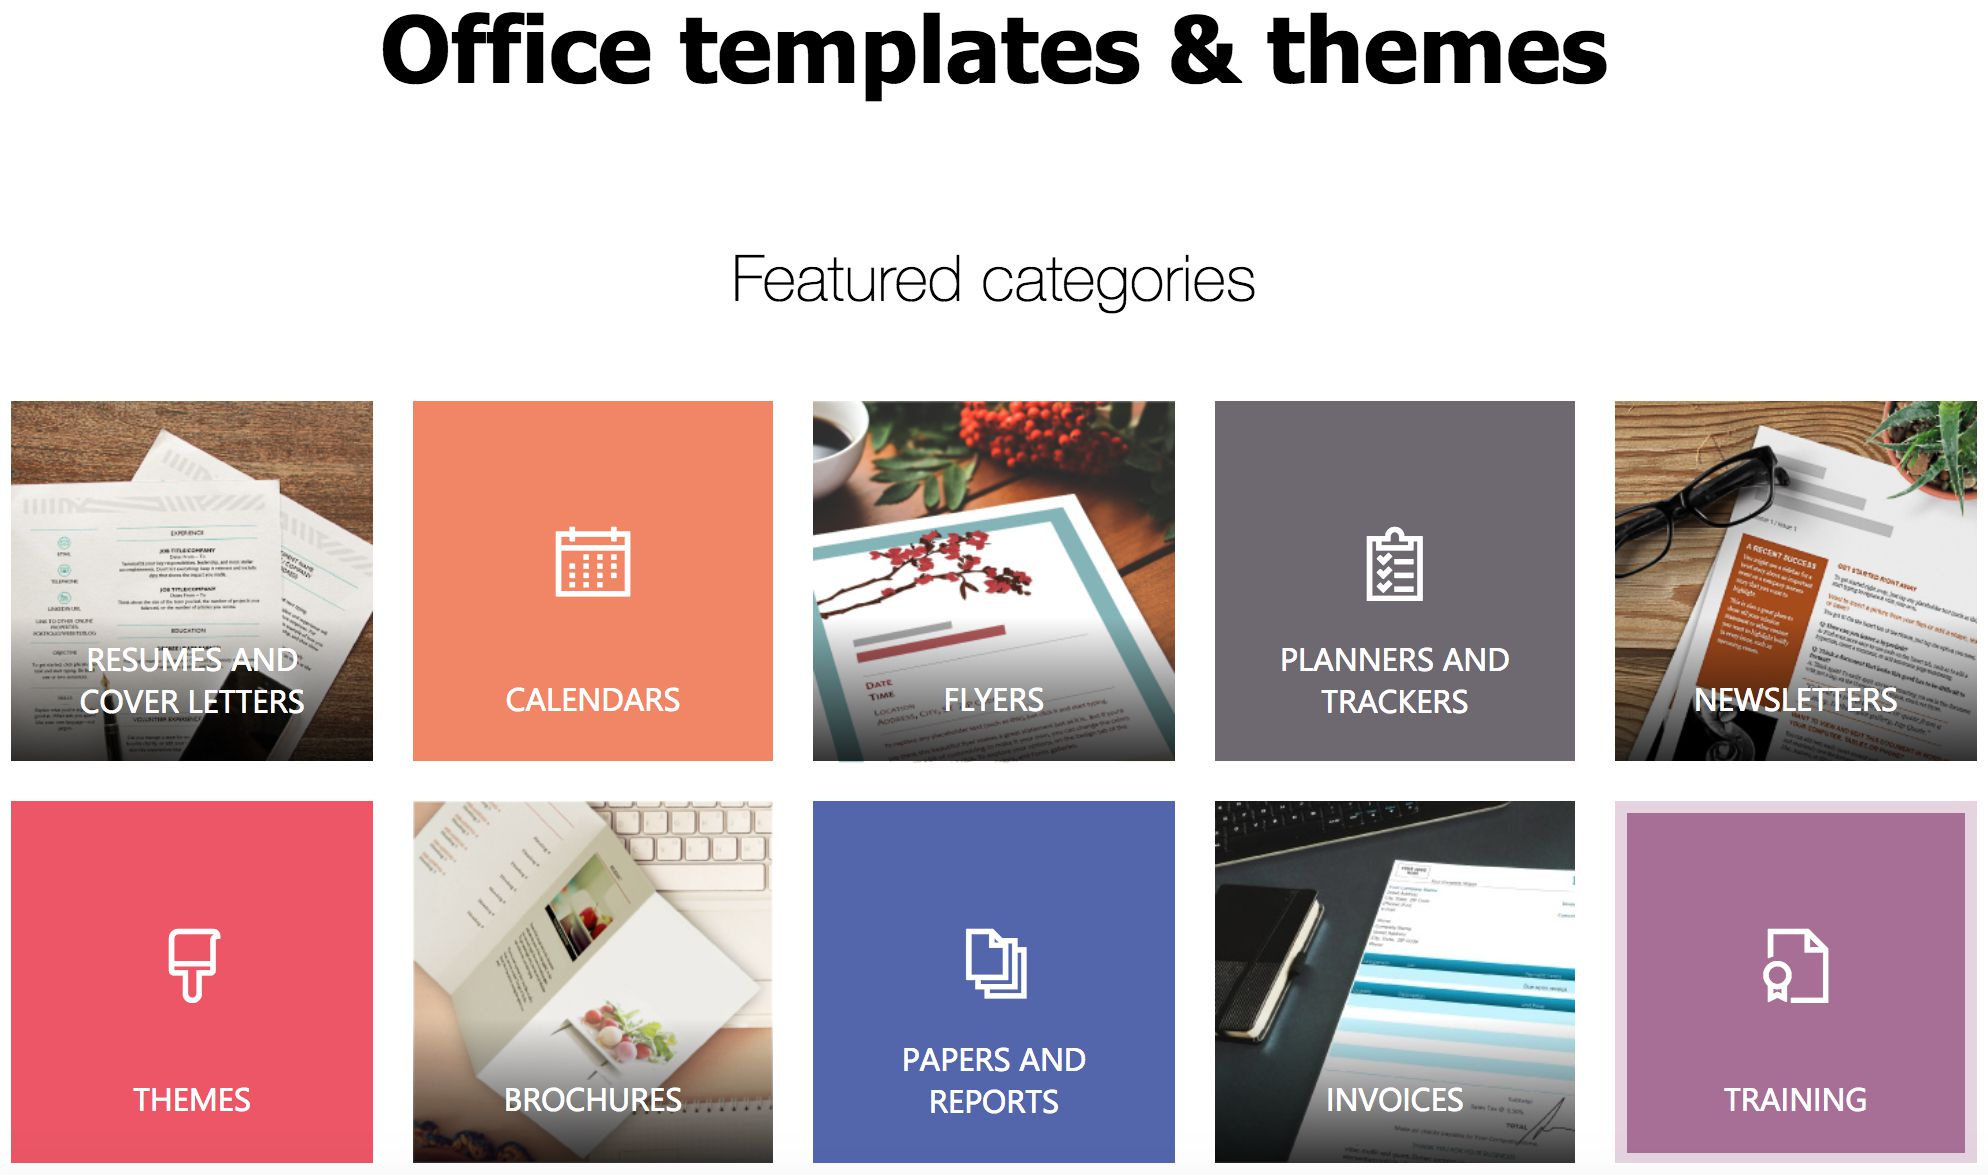 How To Find Microsoft Word Templates On Office Online